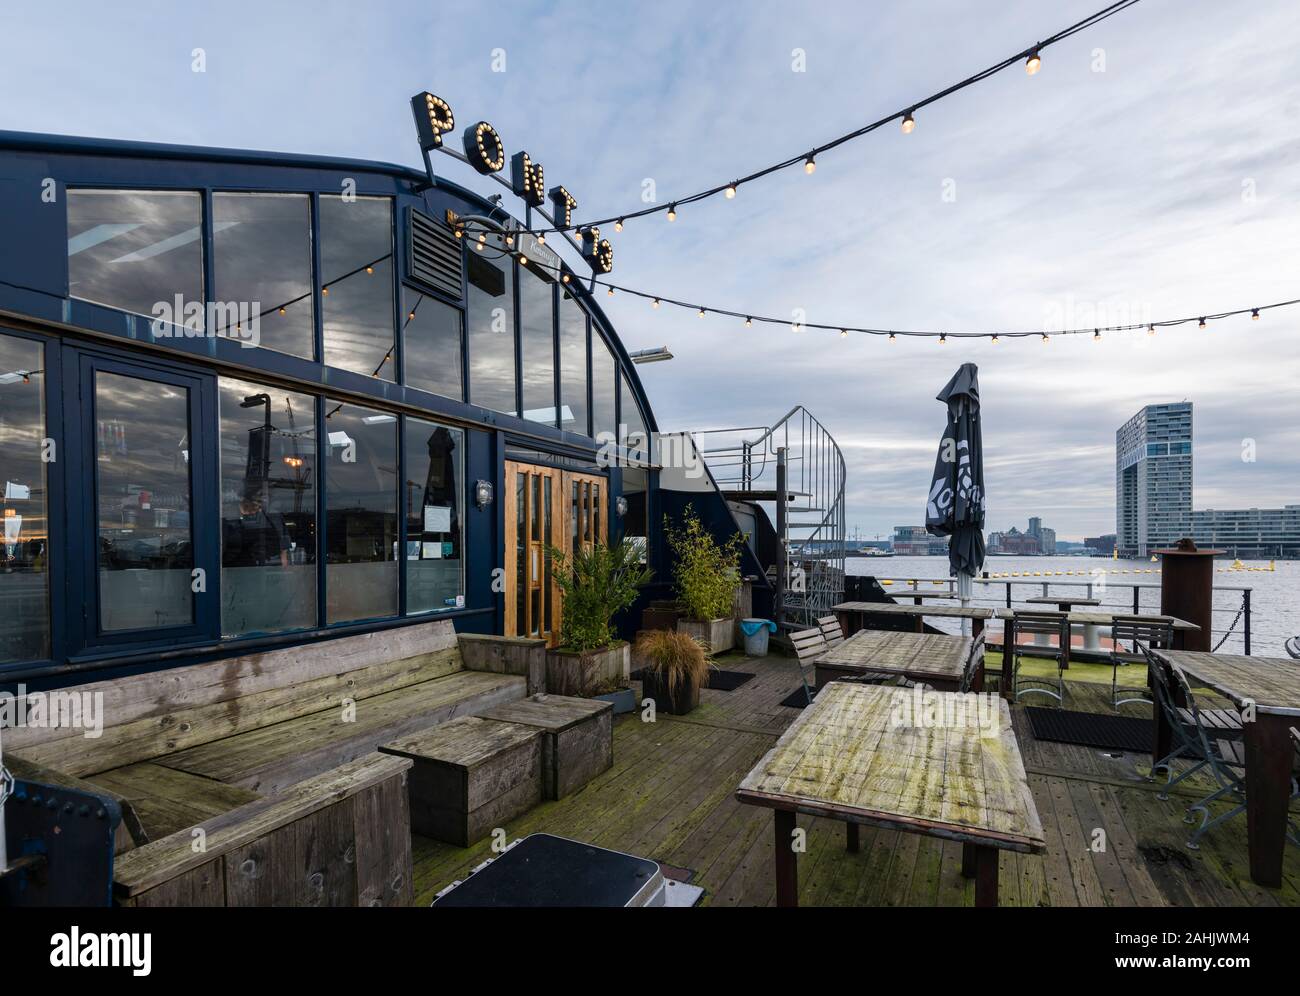 Terrasse of Pont 13, a bar and restaurant on board an old ship at Houthavens, a newly built up-and-coming area of Amsterdam. Stock Photo